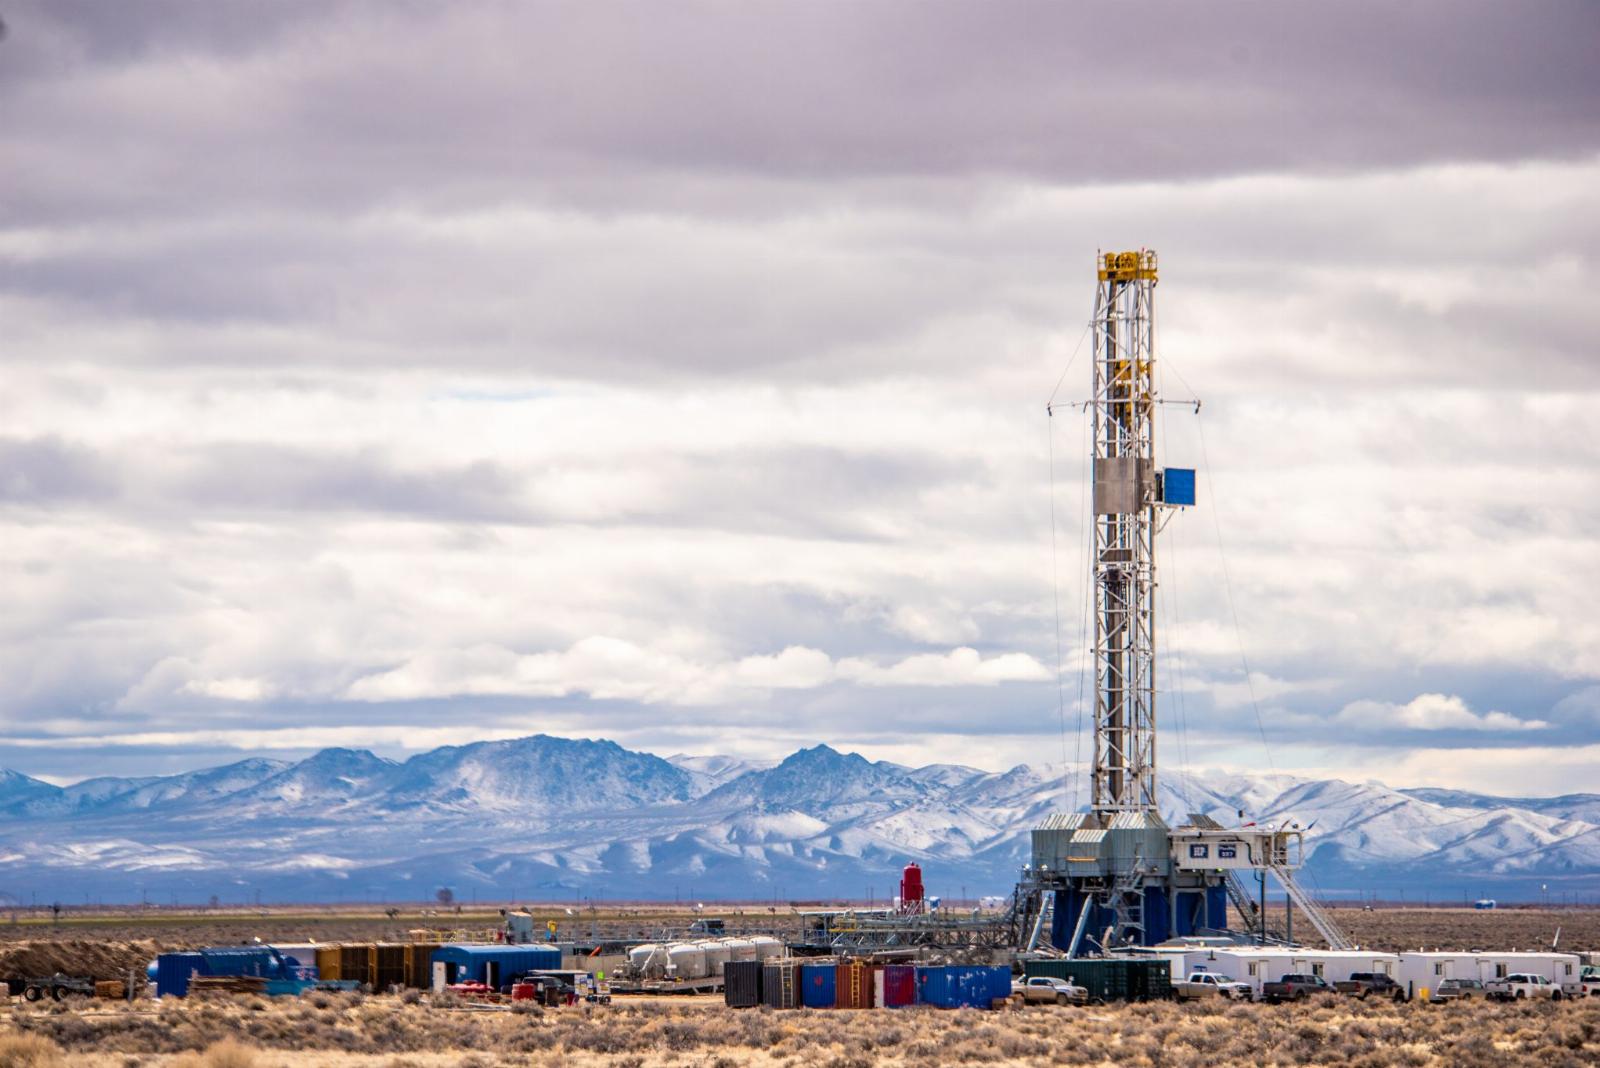 Geothermal startup Fervo Energy is tapping fresh $221M round, filing reveals